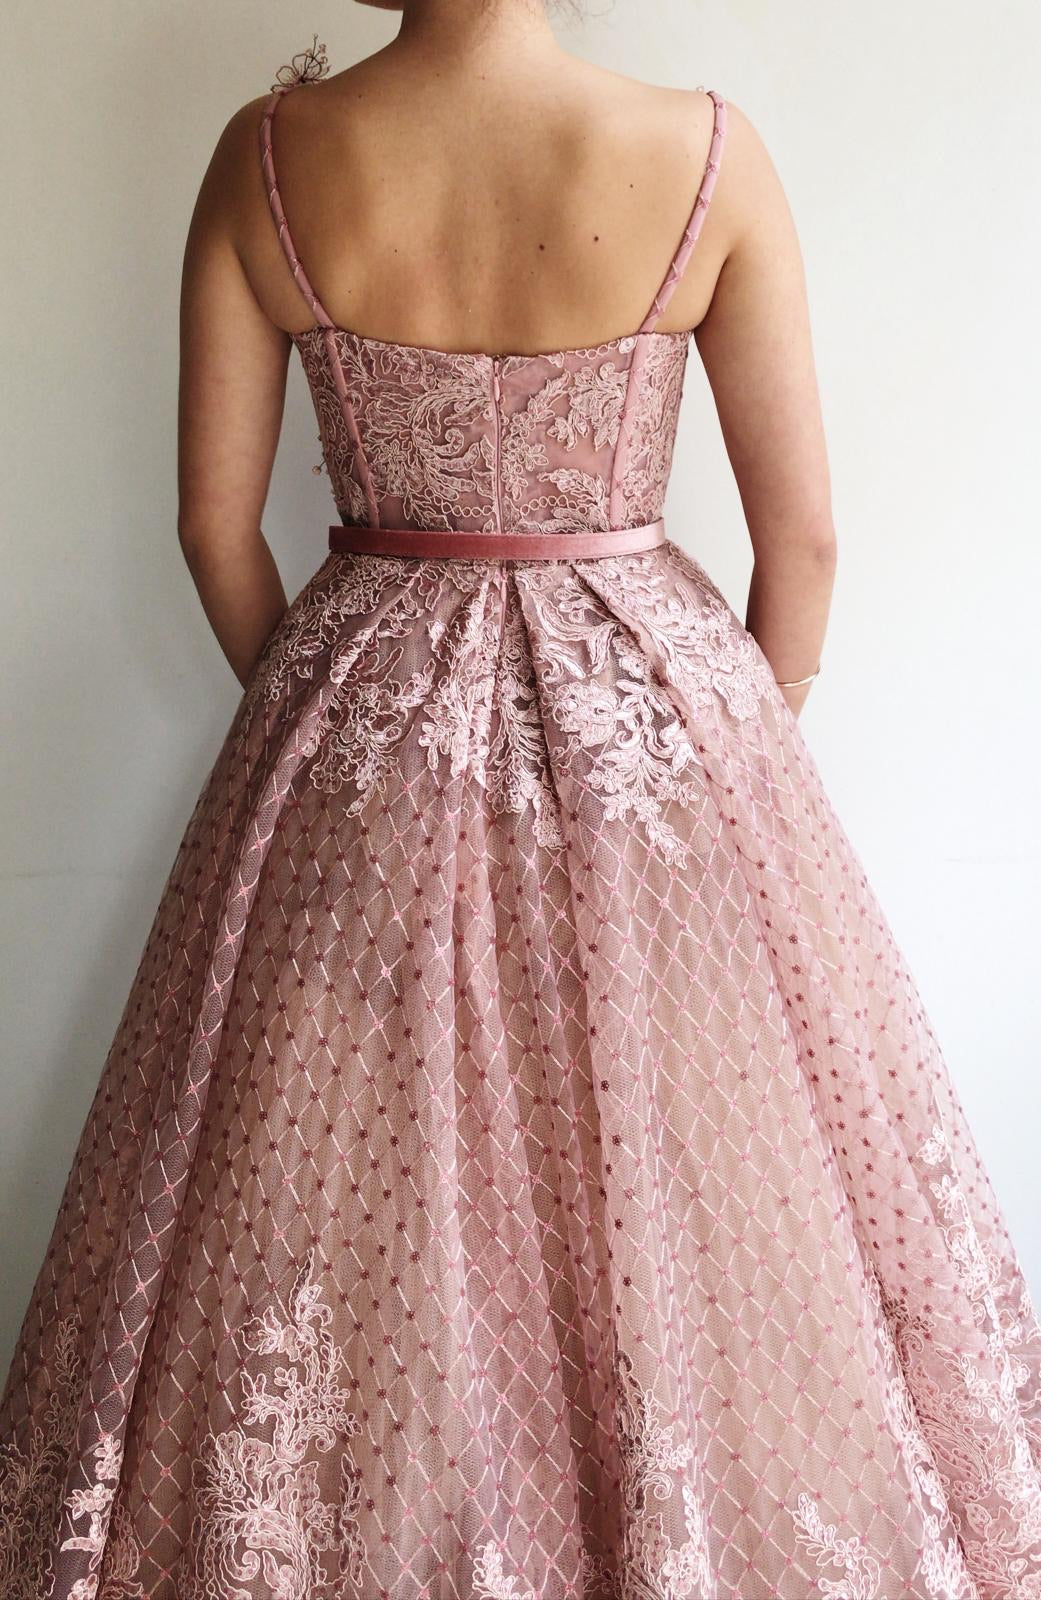 Pink overskirt dress with belt, lace, spaghetti straps and embroidery